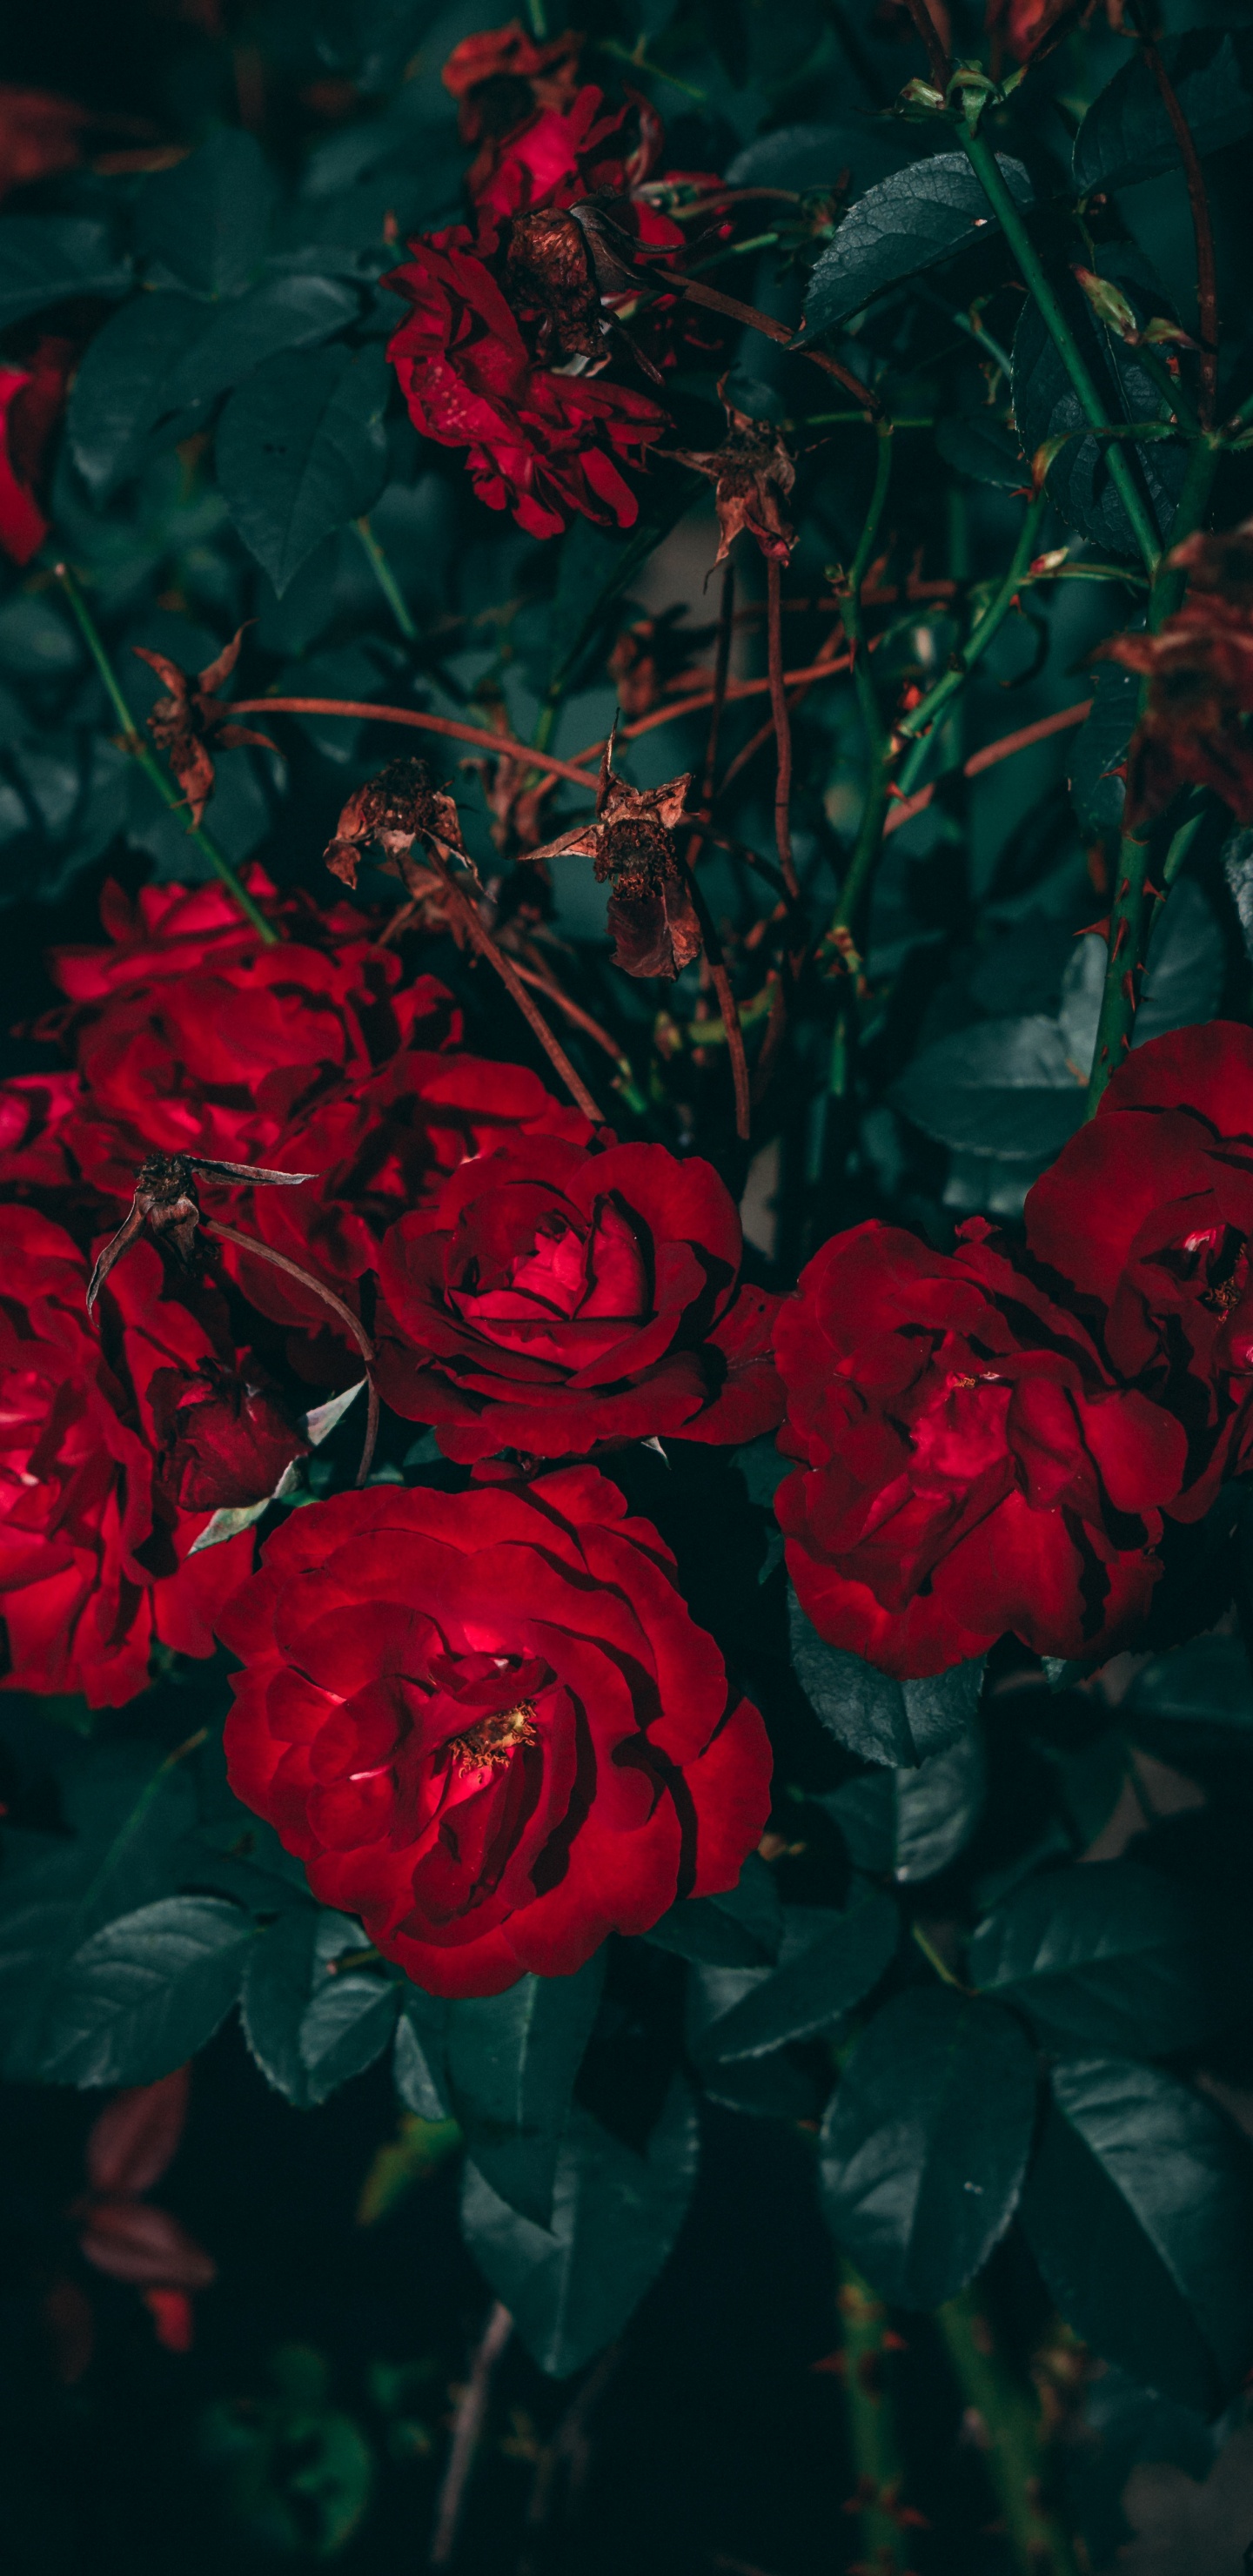 Red Roses in Close up Photography. Wallpaper in 1440x2960 Resolution